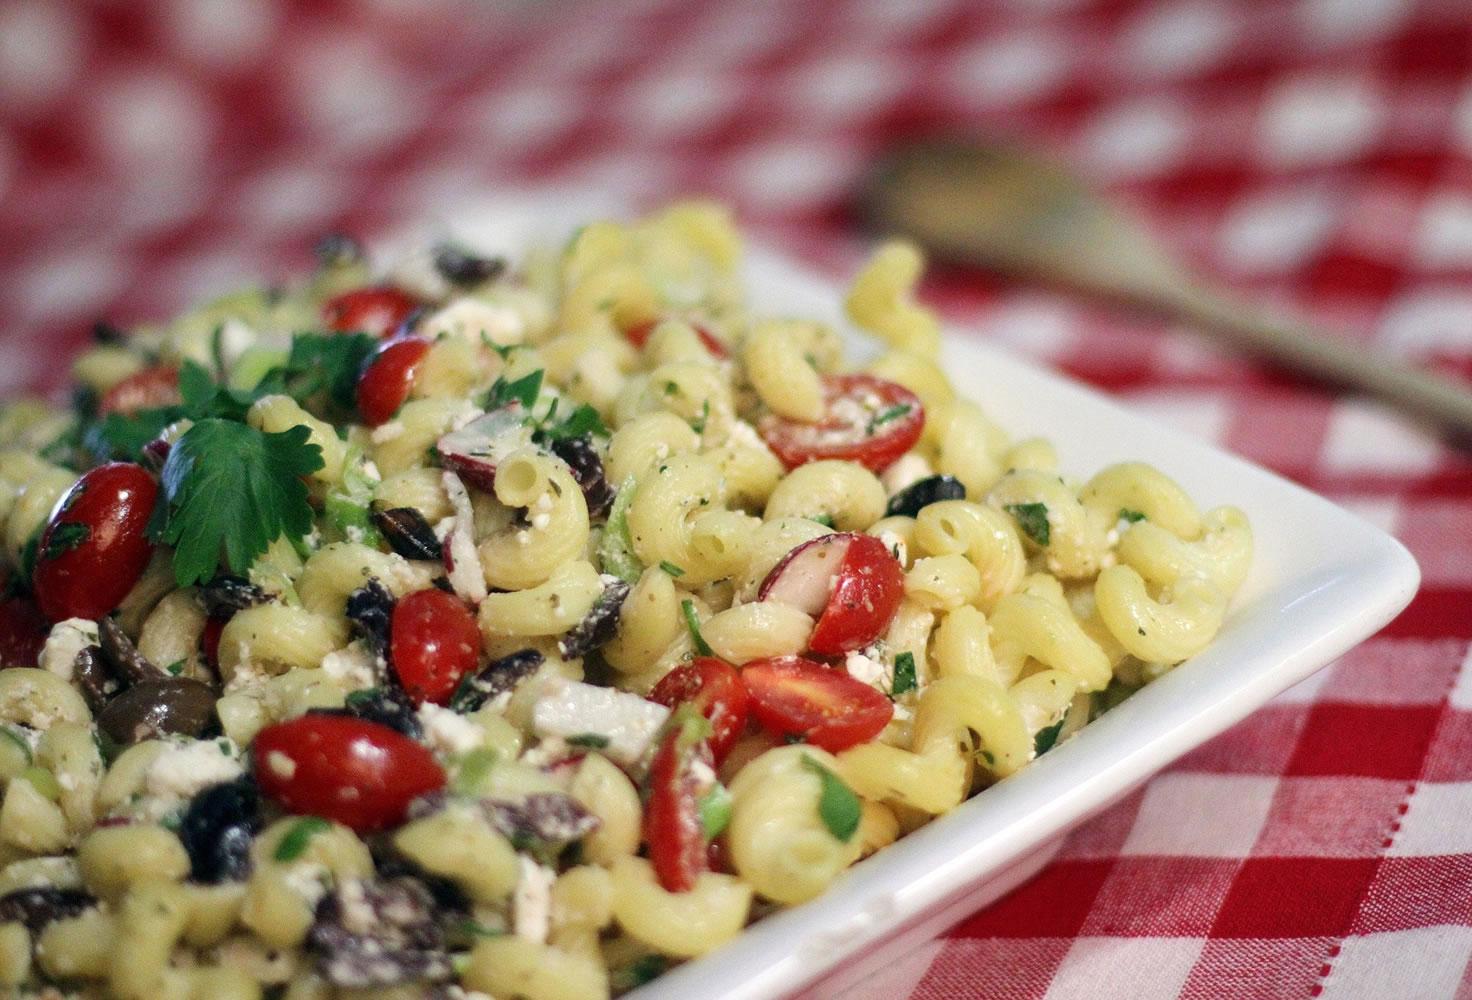 A holiday gathering, or any other outdoor cookout or potluck, for that matter, is not complete without some sort of a pasta salad.